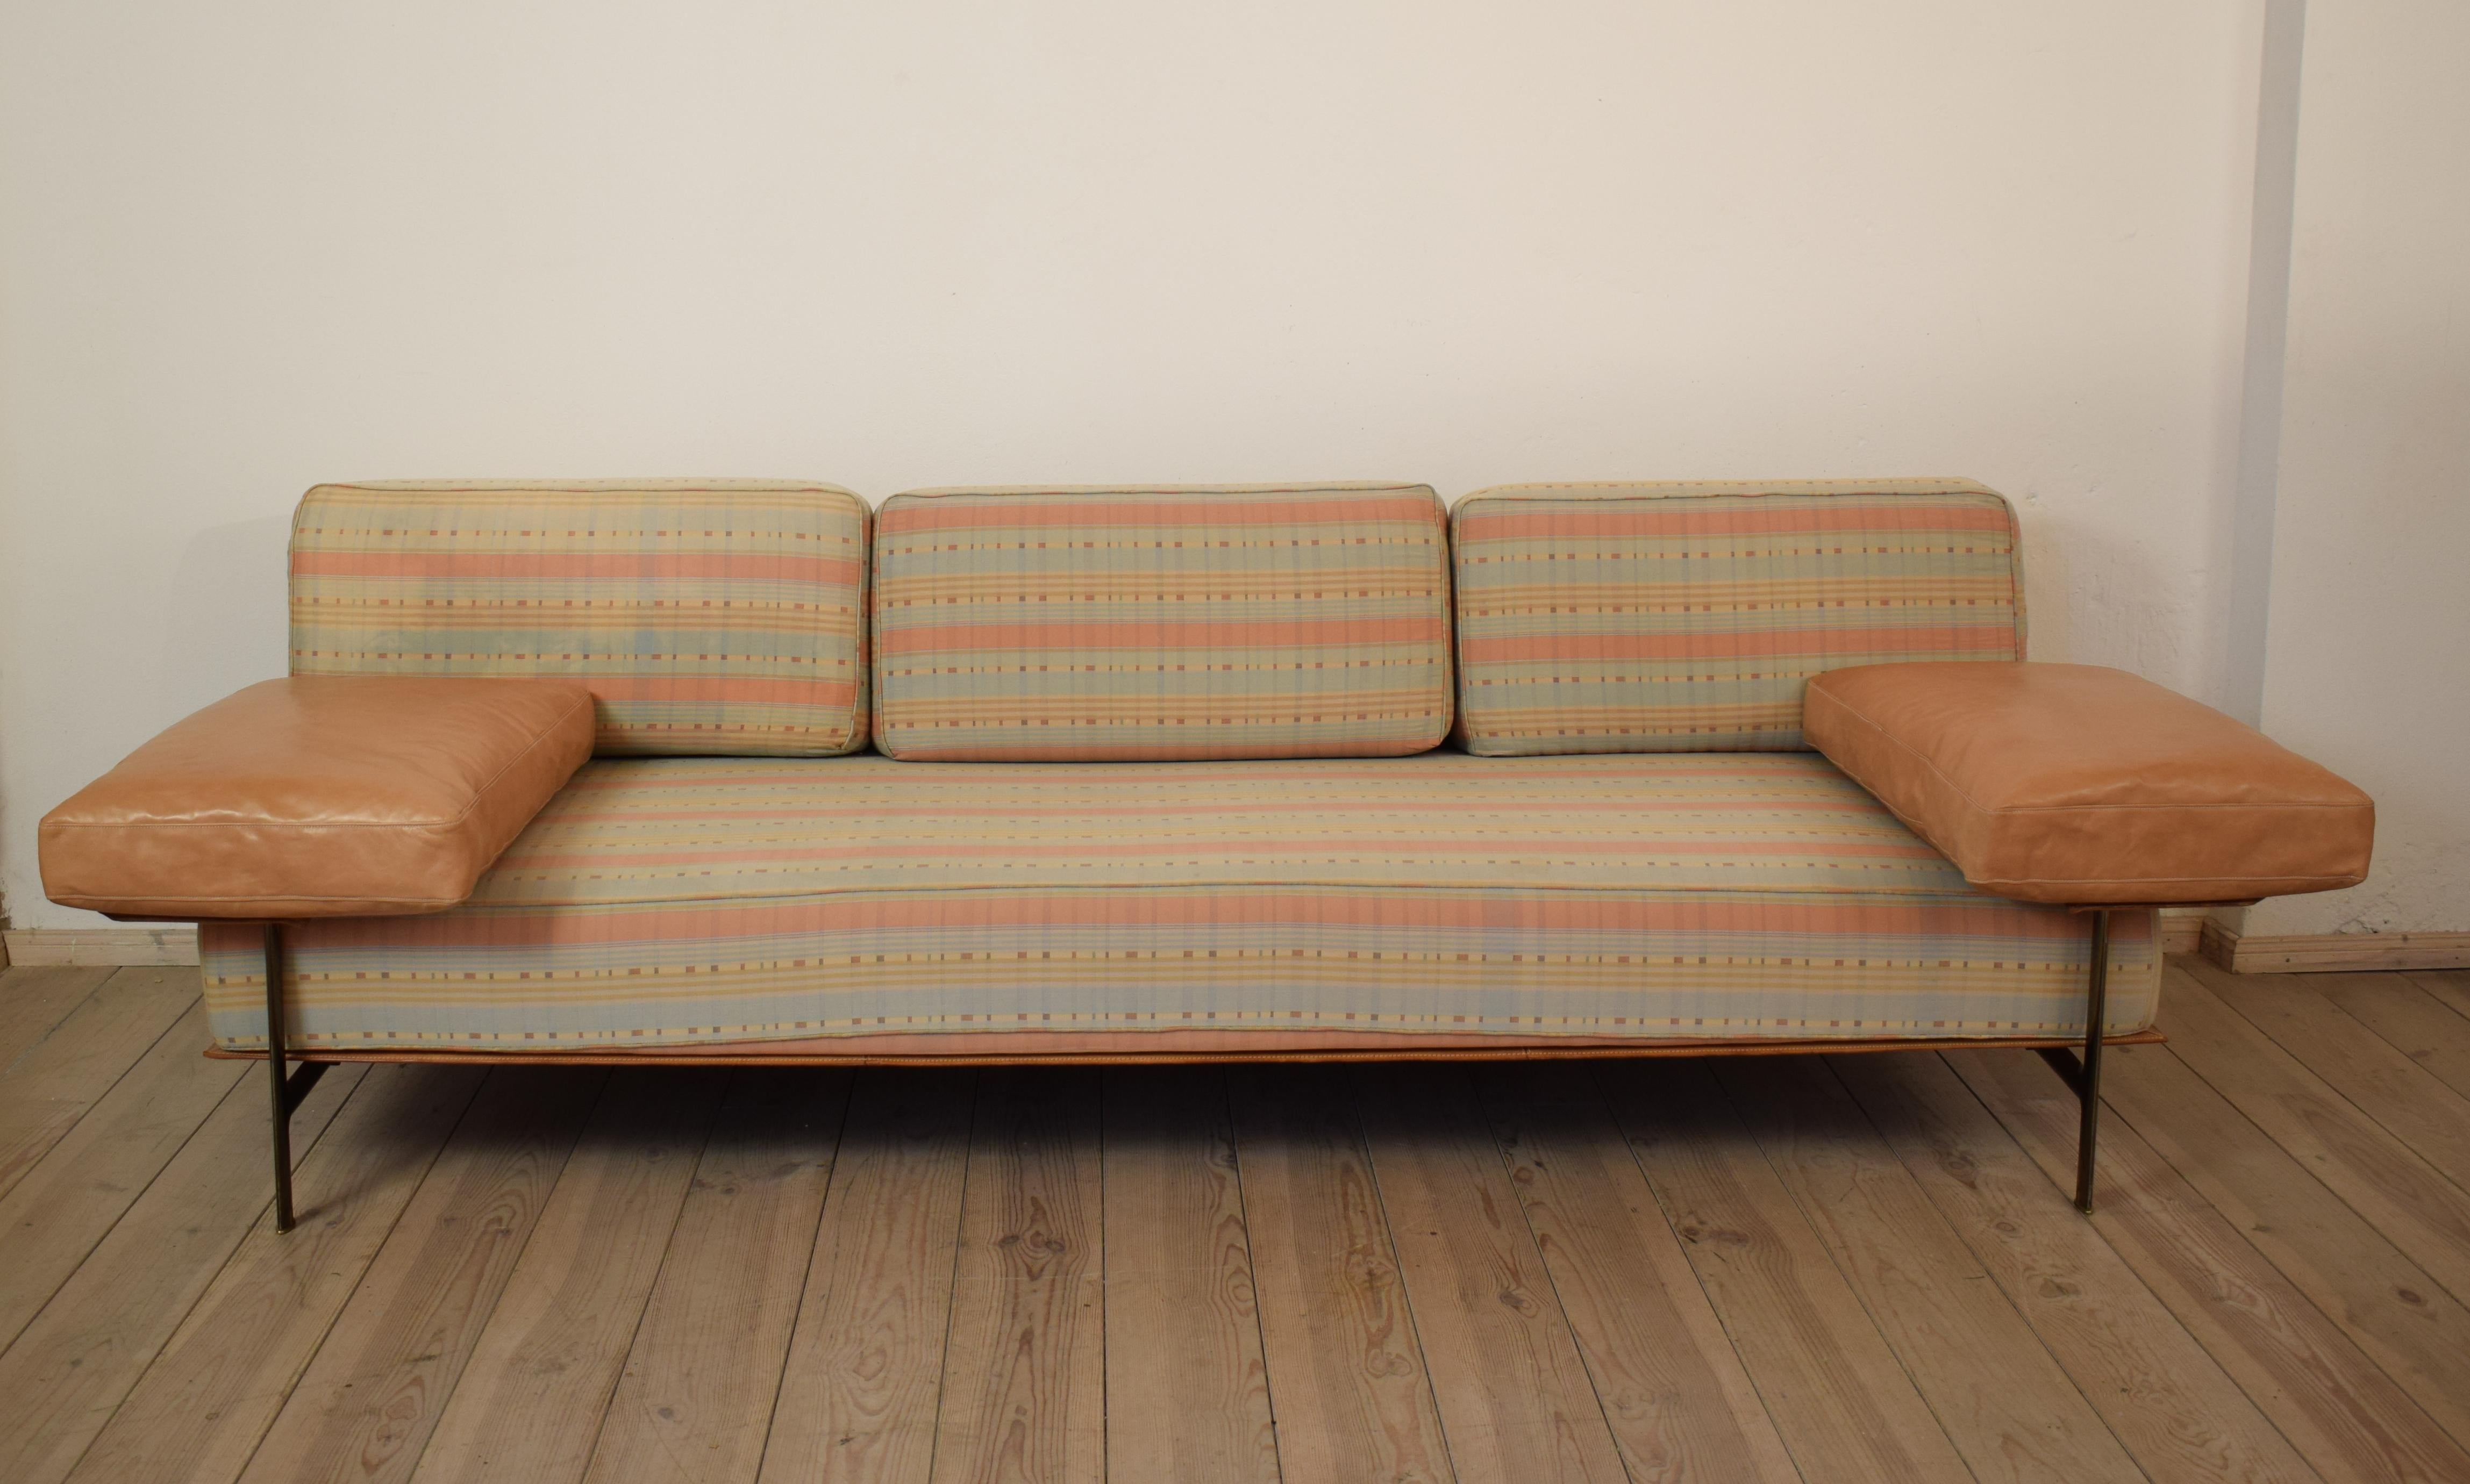 This beautiful Sofa was designed by Antonio Citterio and Paolo Nava for B&B Italia, Italy in 1979.
It is called 